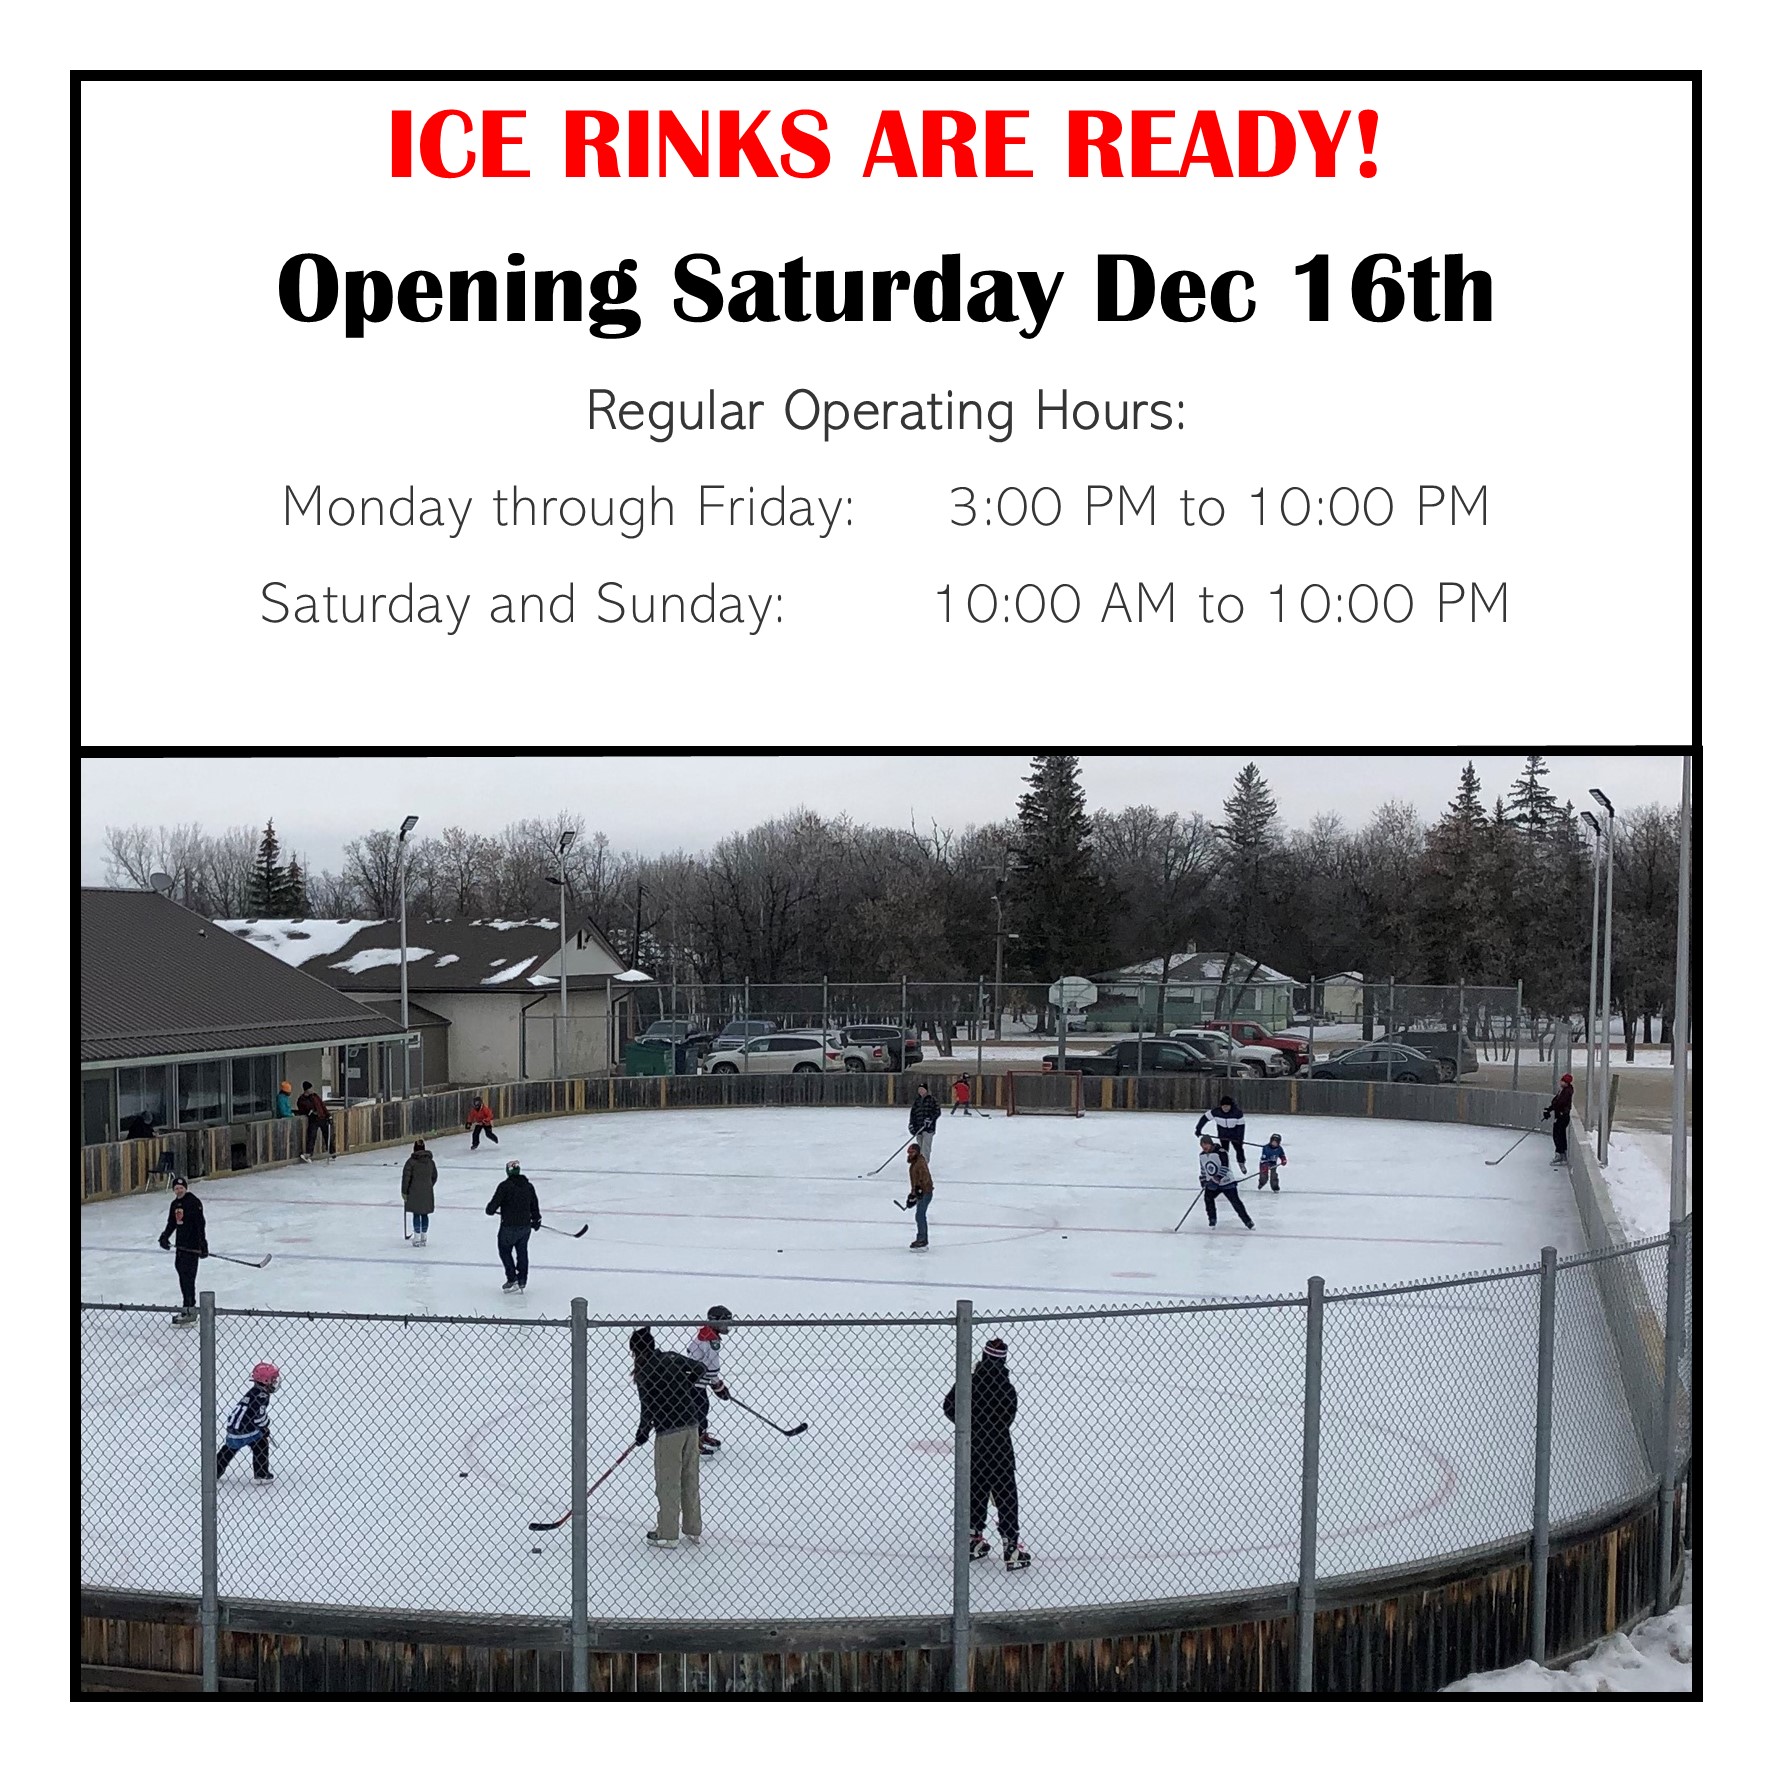 OUTDOOR RINKS ARE OPEN!